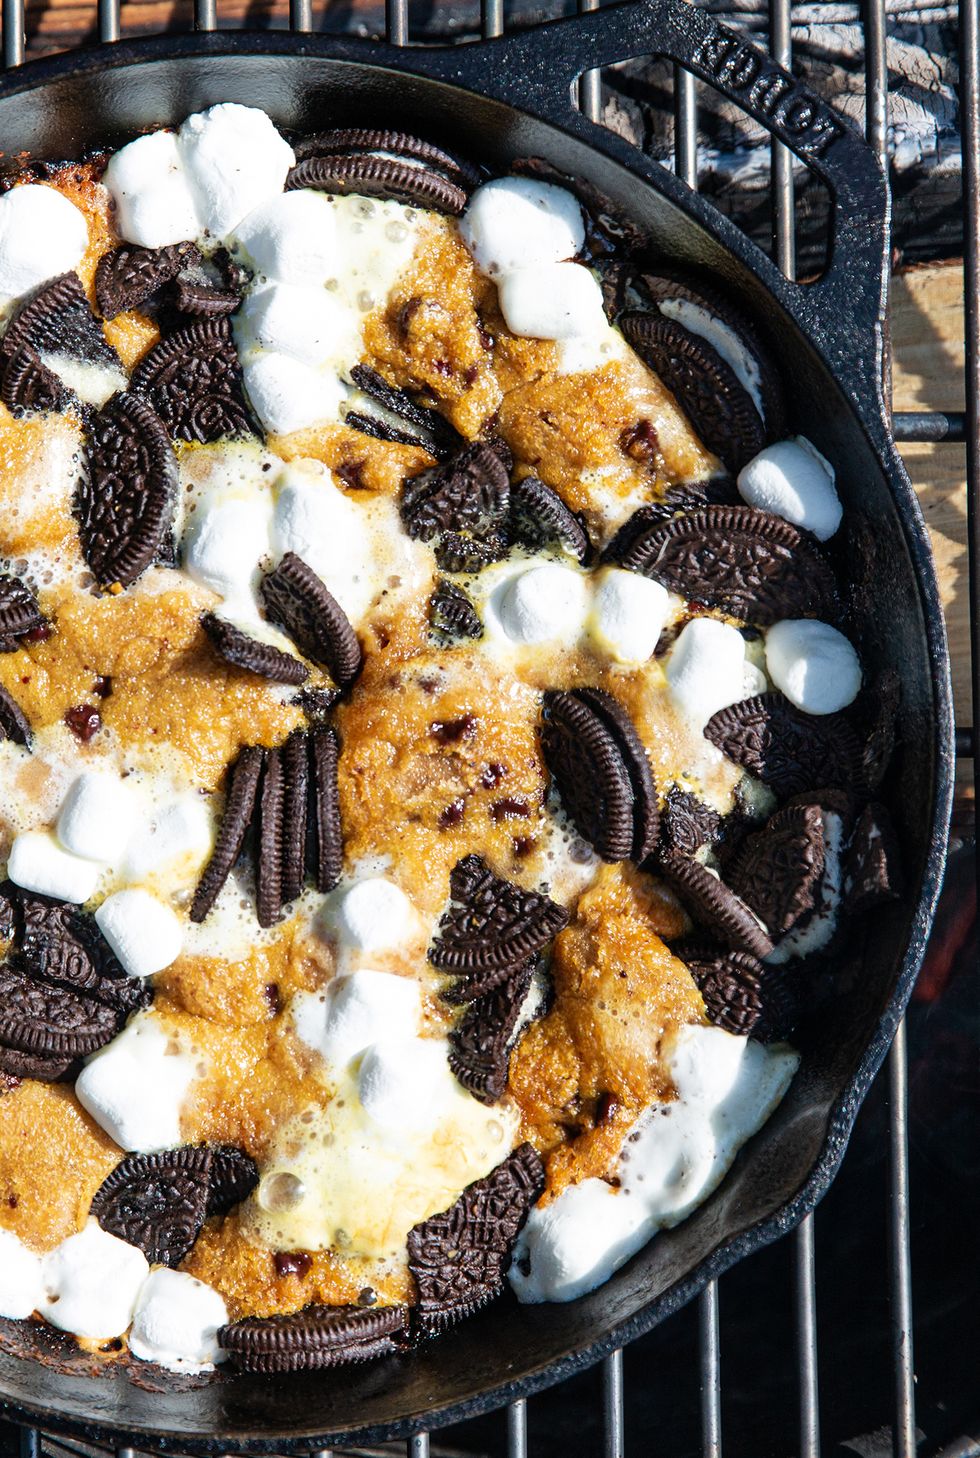 https://hips.hearstapps.com/hmg-prod/images/20210404-ehg-delish-cookie-dough-smores-skillet00010-1622595315.jpg?crop=0.448xw:1.00xh;0.165xw,0&resize=980:*